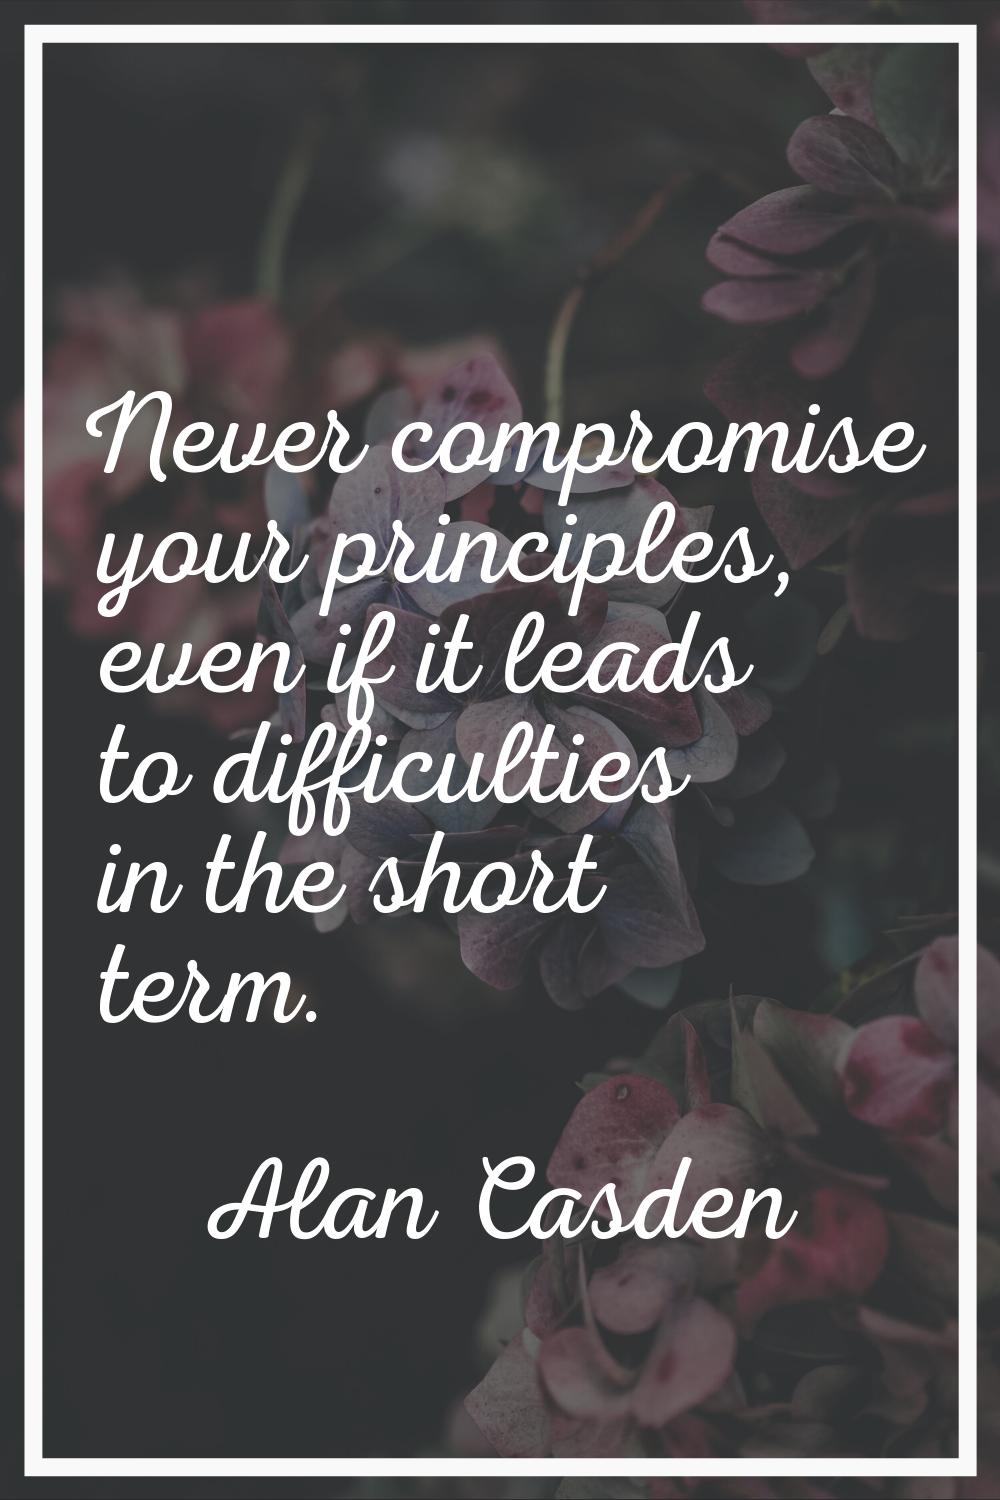 Never compromise your principles, even if it leads to difficulties in the short term.